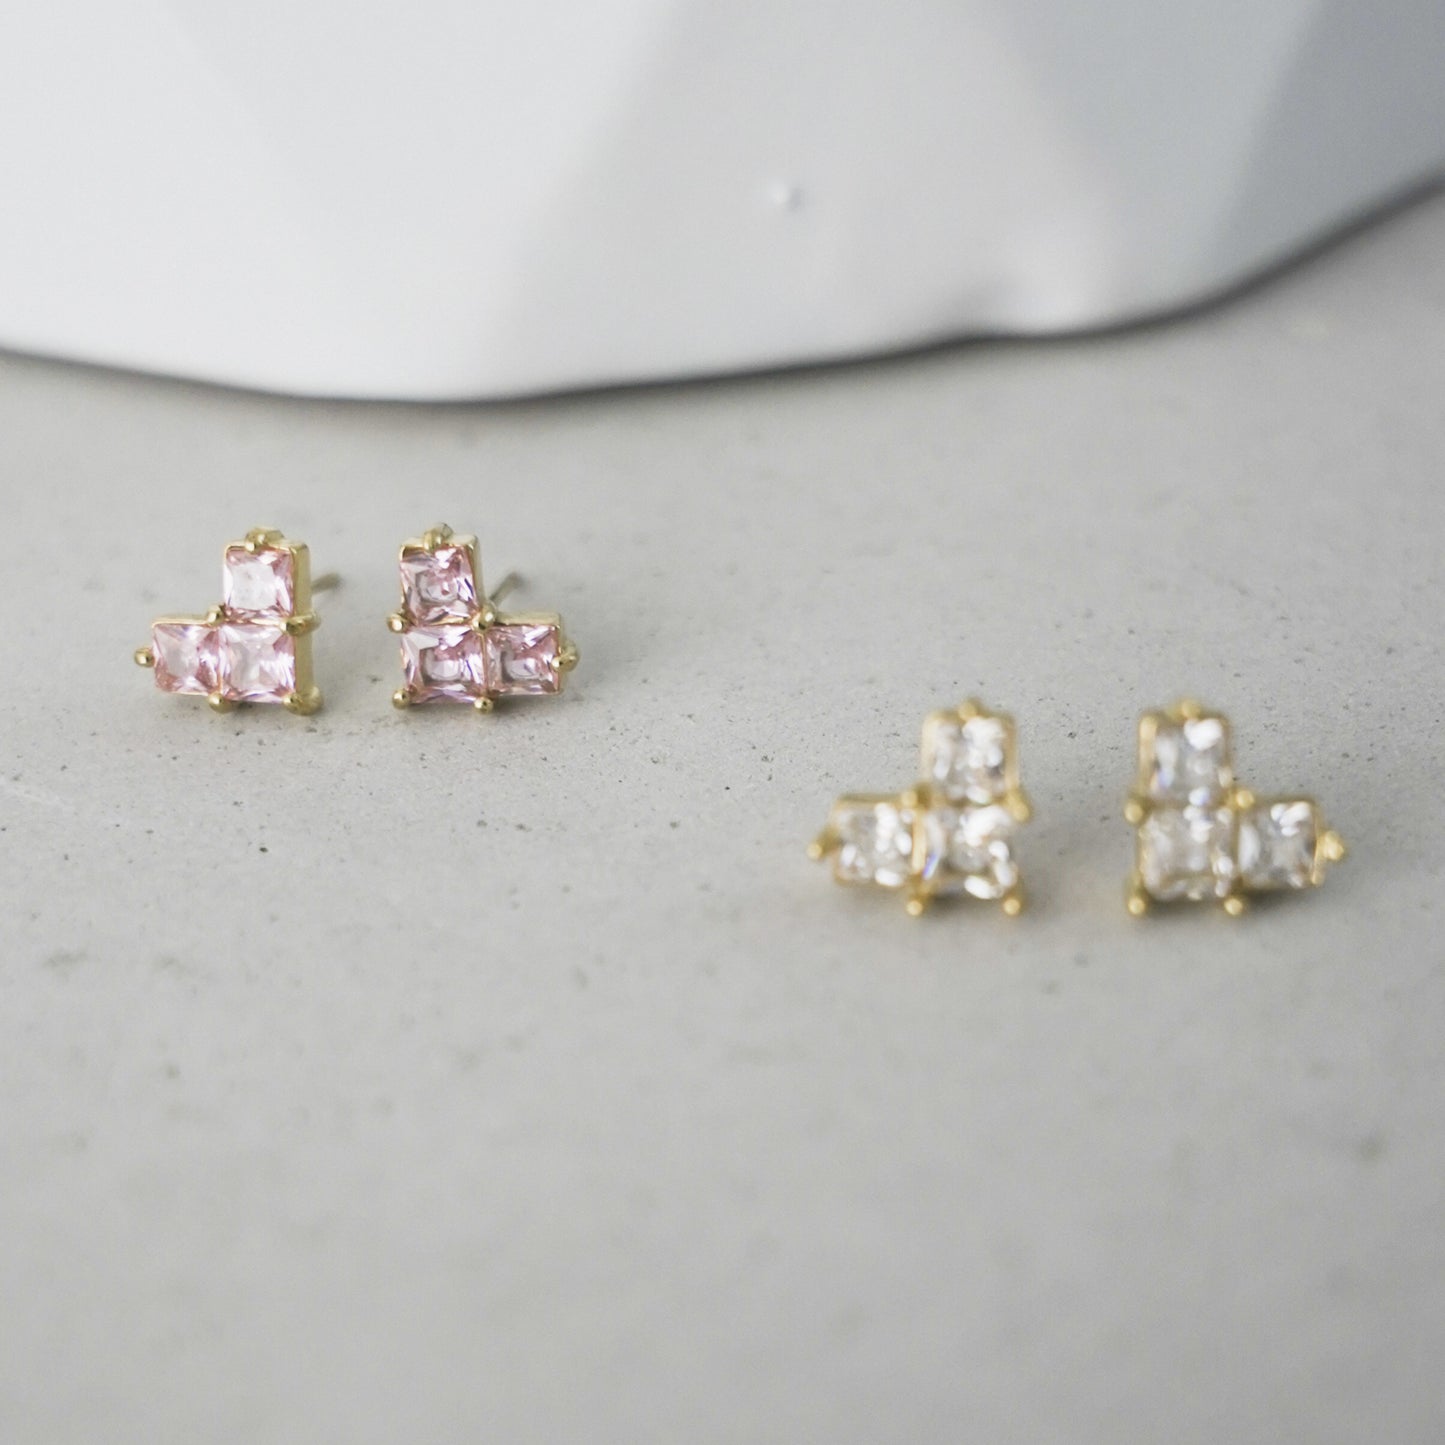 Subtle Tetris Hearts - CZ tetris earring in white and pink